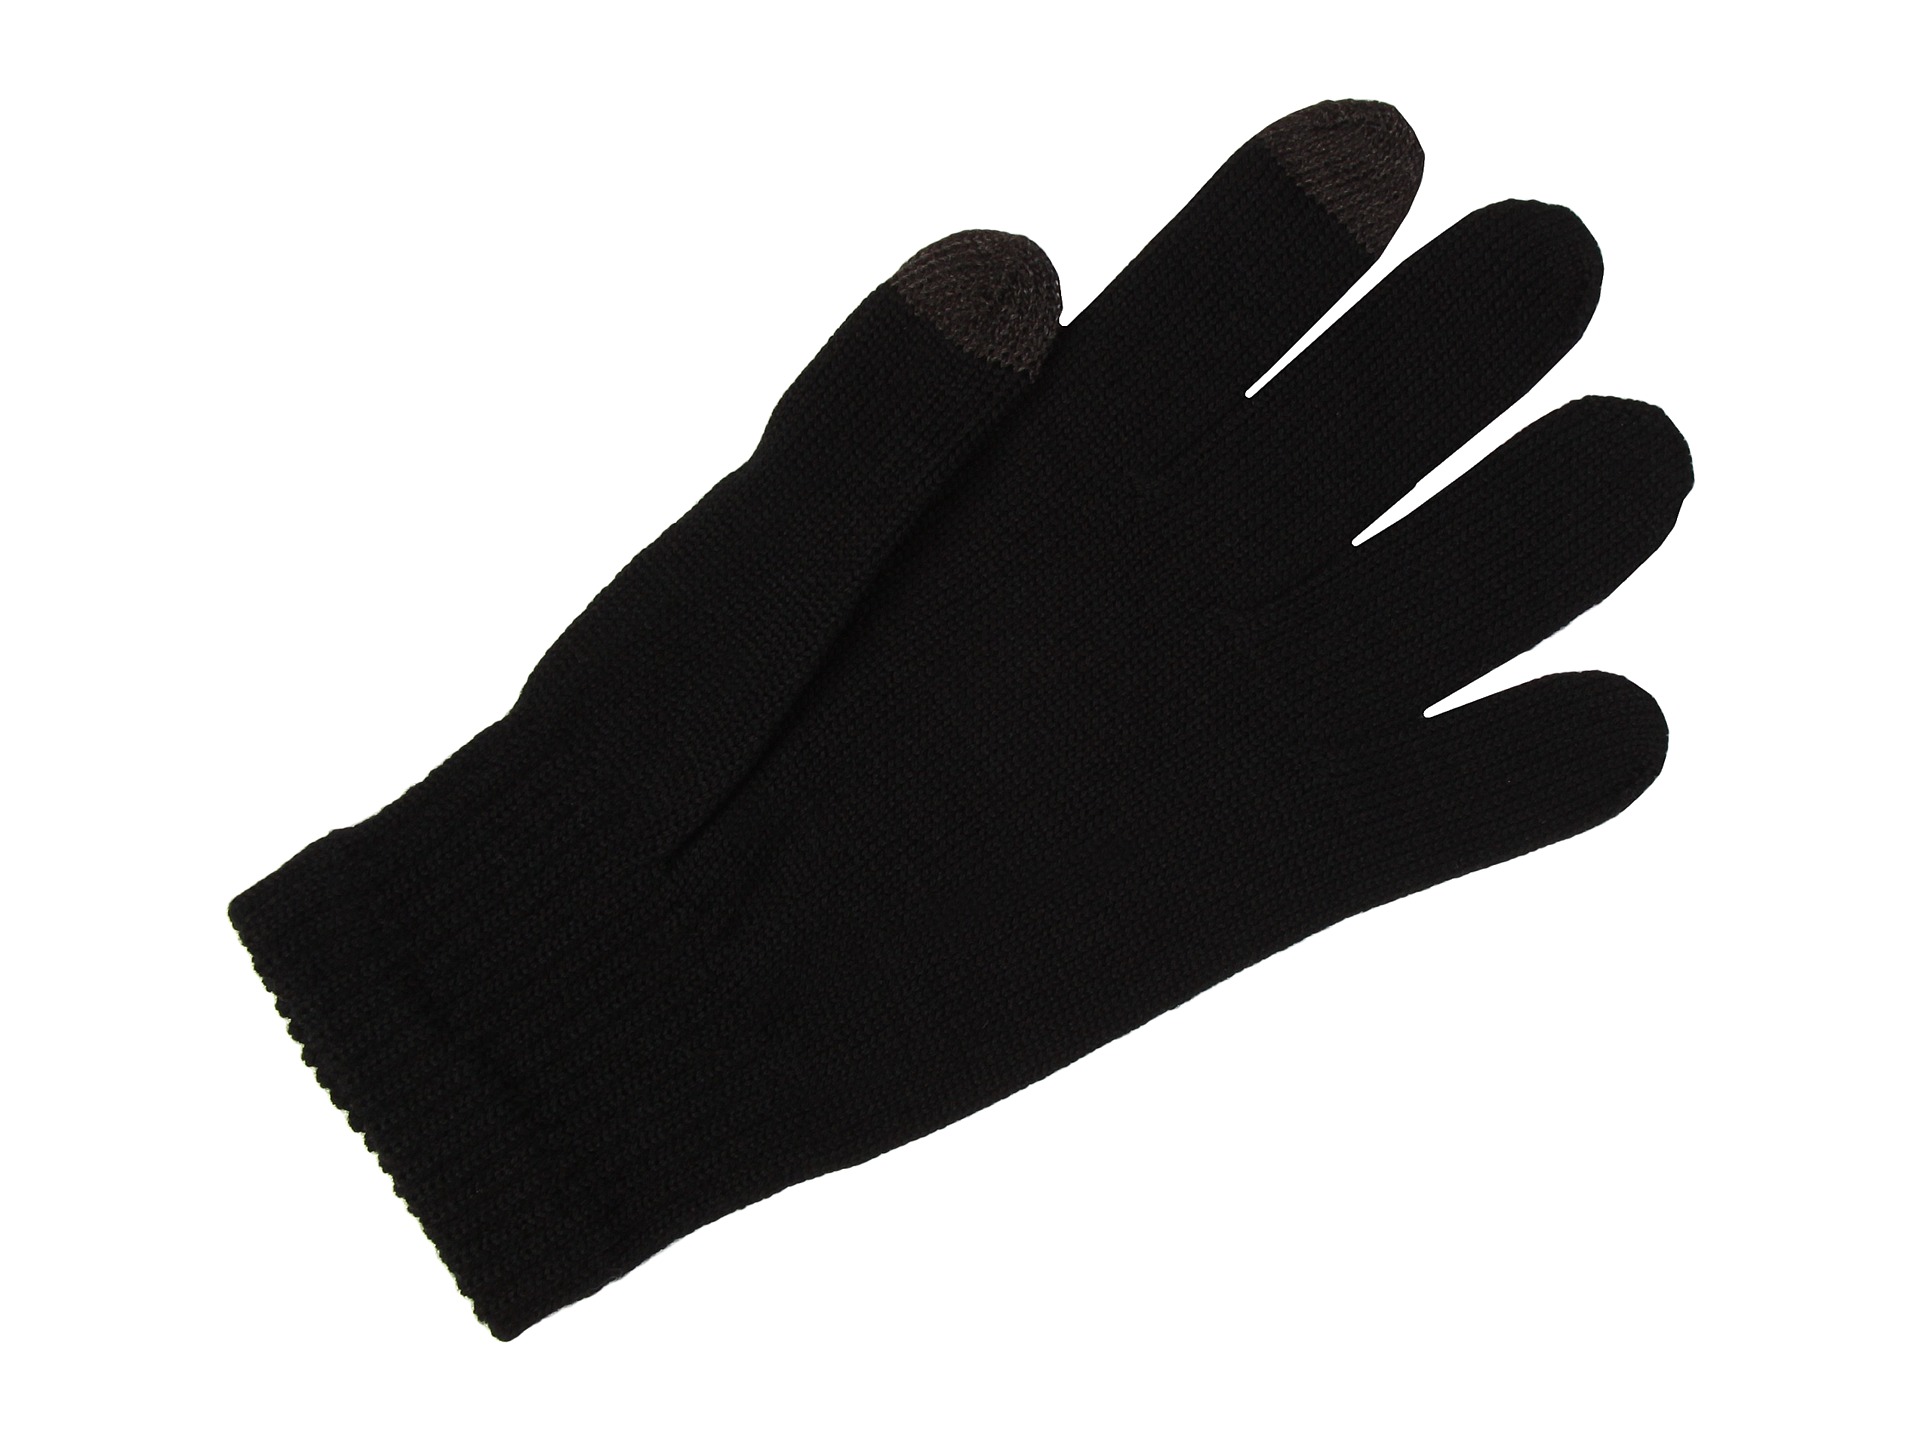 Smartwool Liner Knit Glove | Shipped Free at Zappos